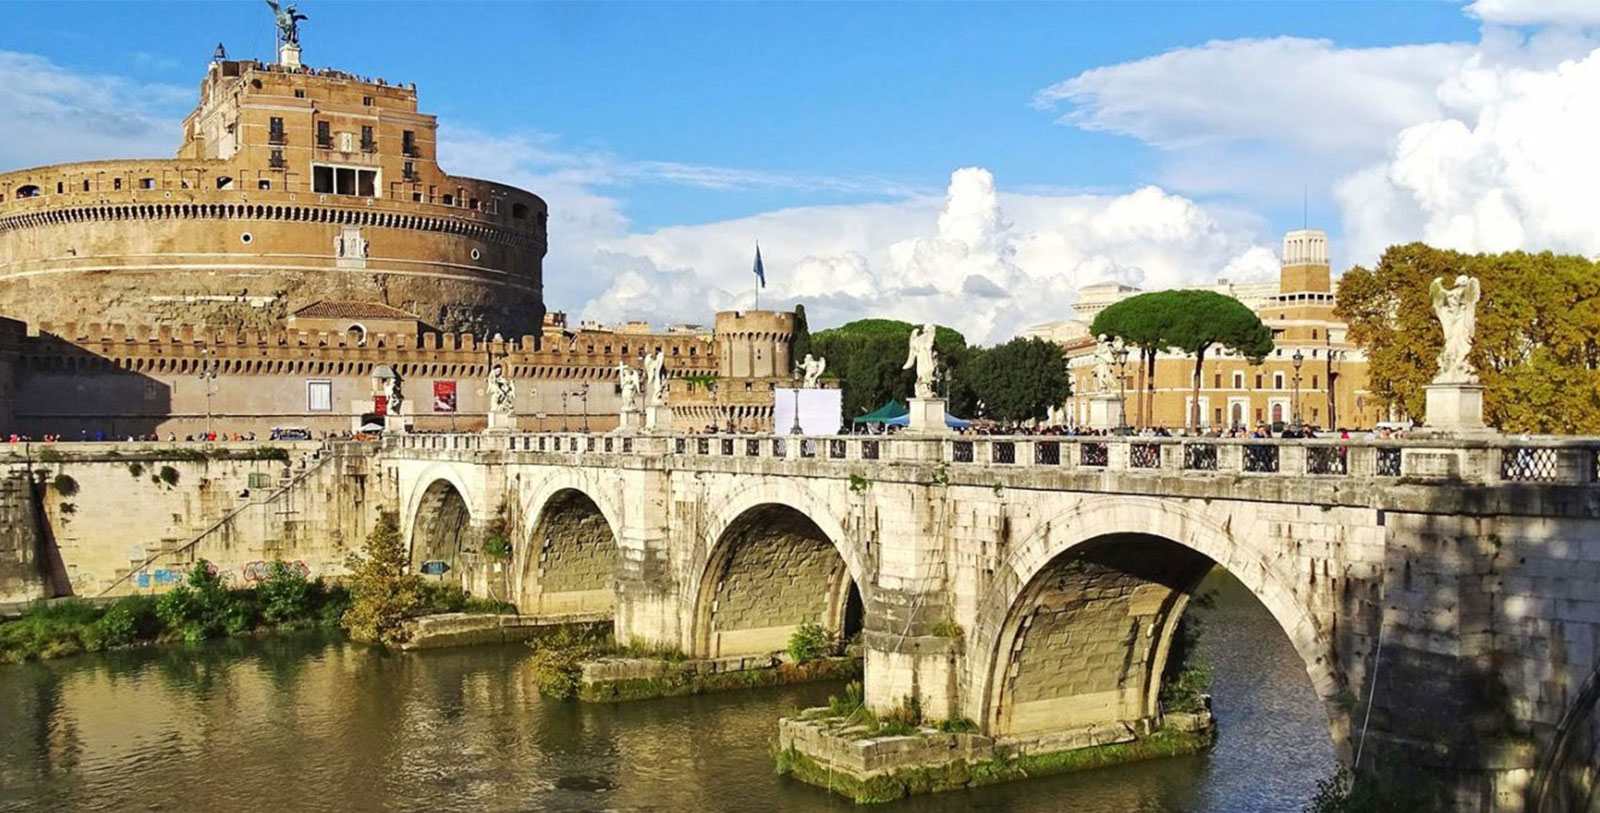 Experience the nearby Castel Sant'Angelo, a papal fortress that was originally used as a Roman emperor's final resting place.